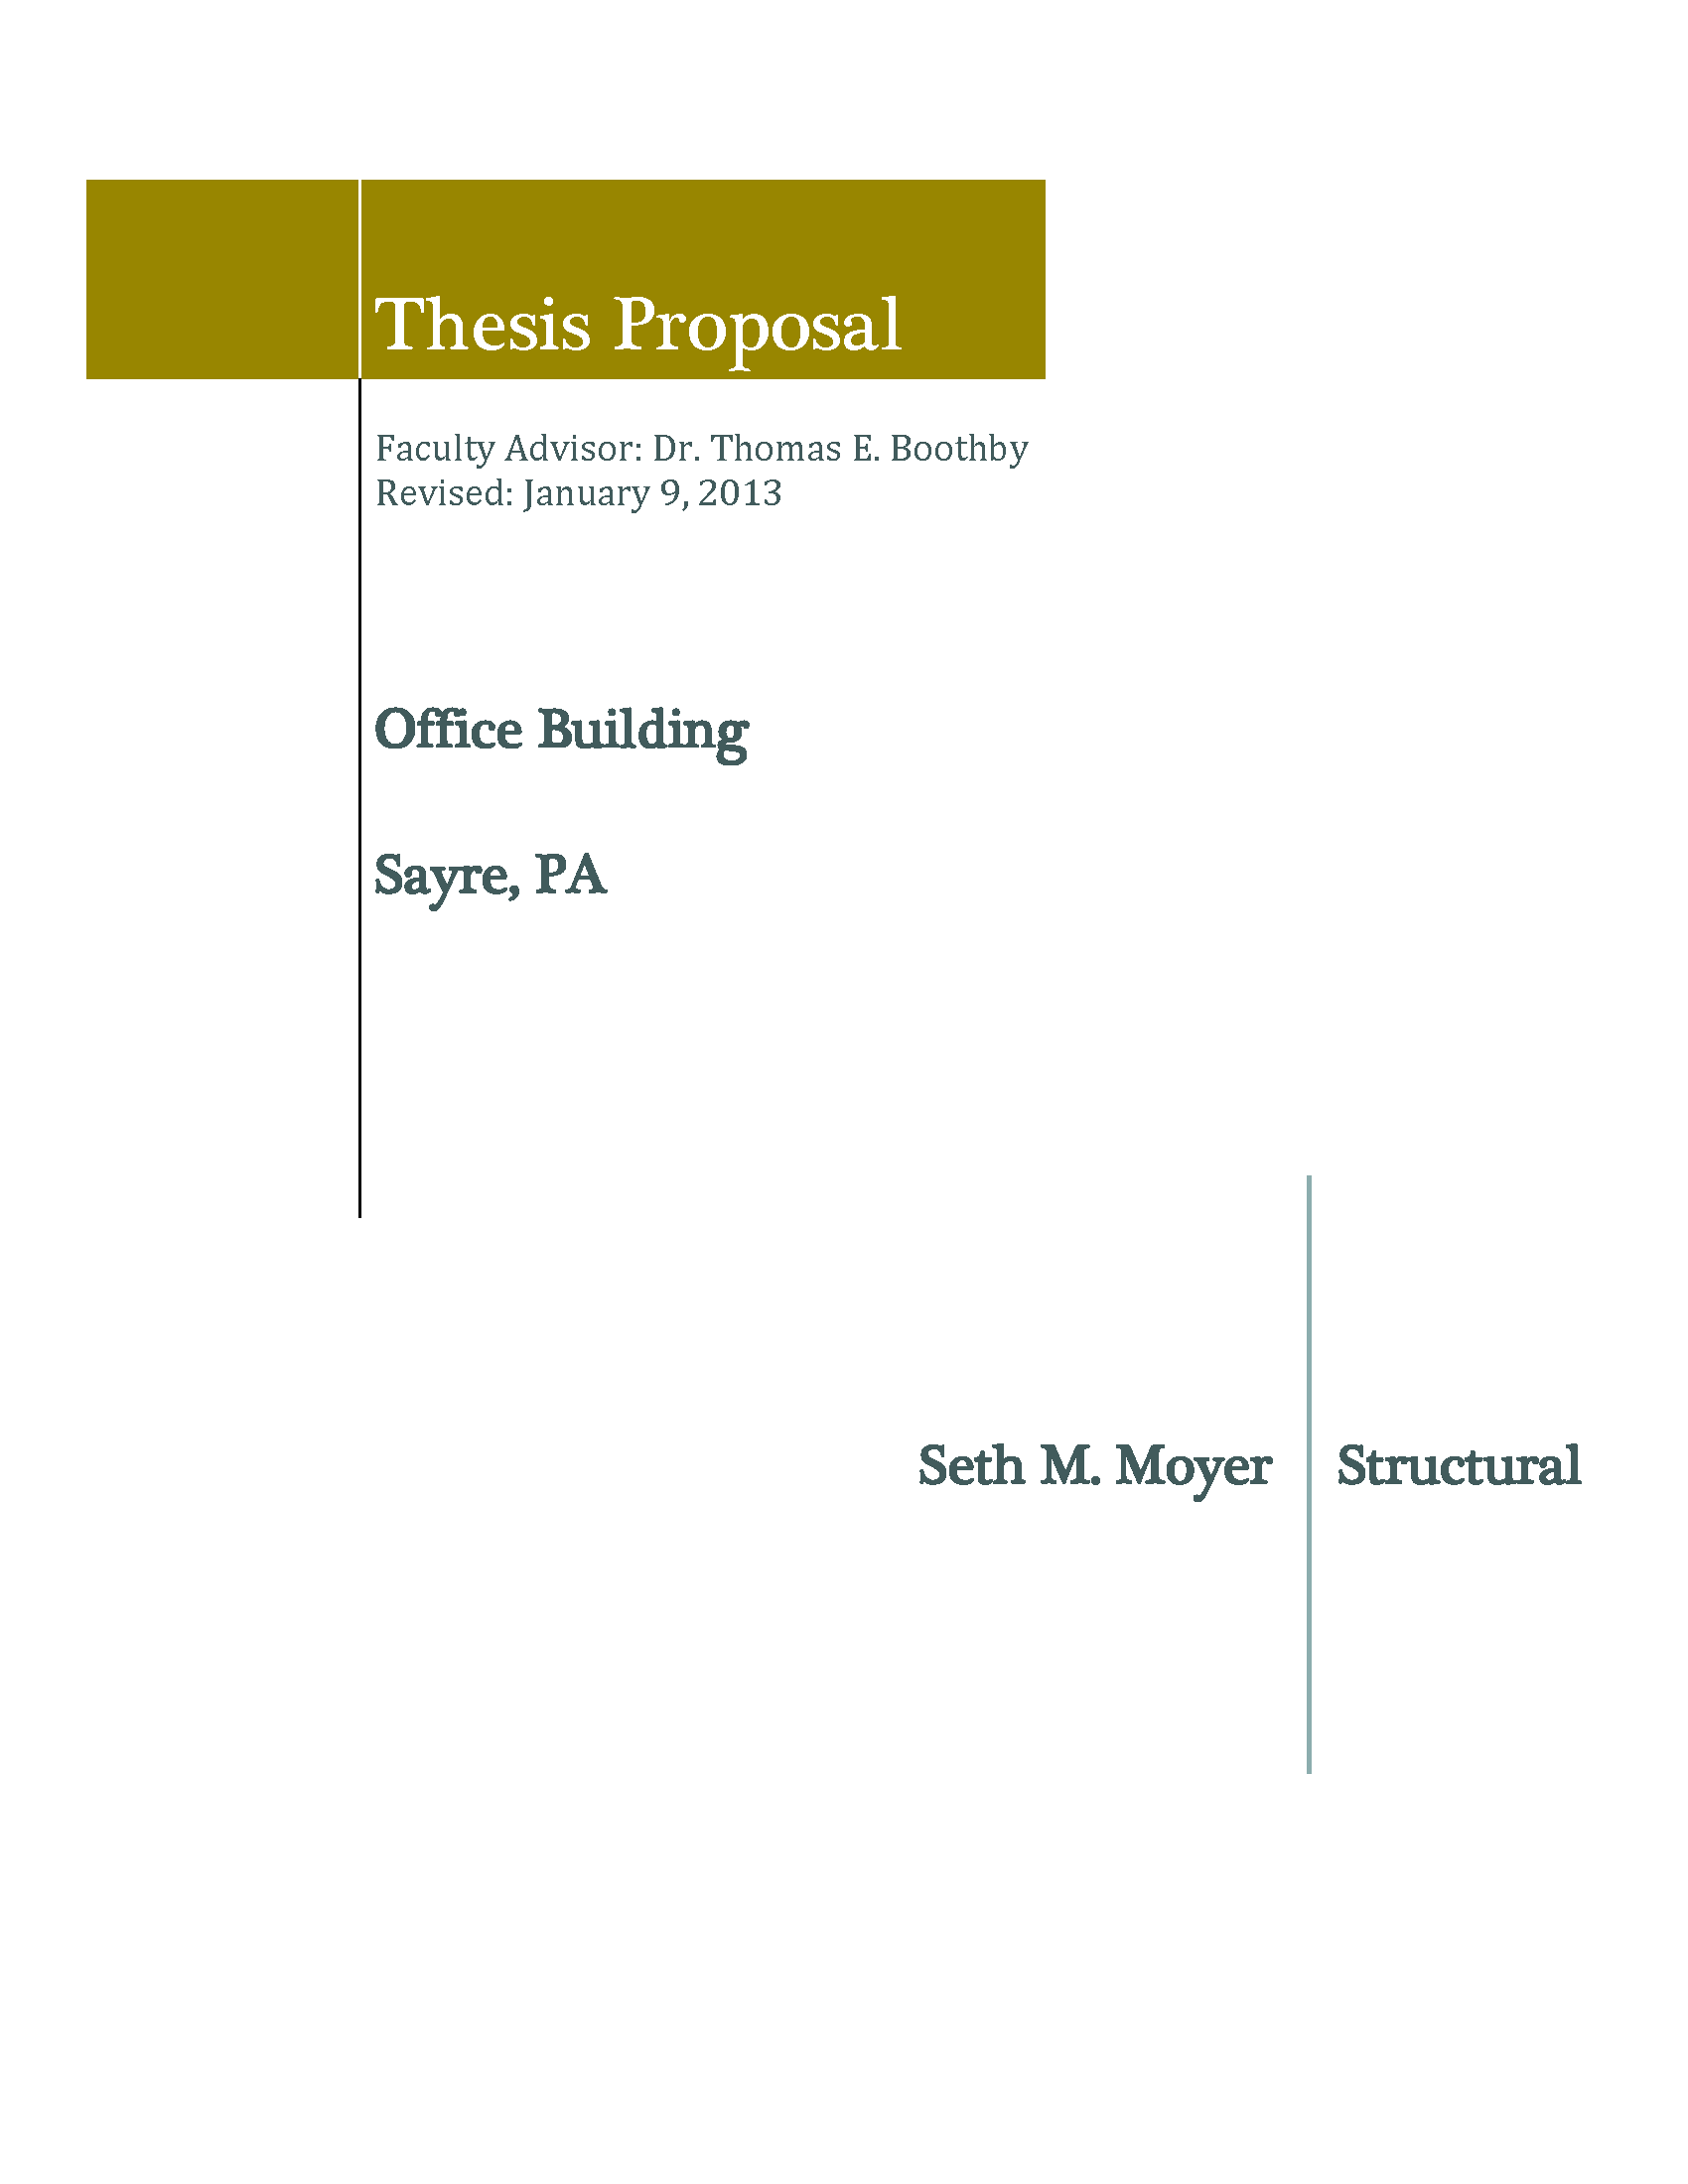 Thesis Proposal - Revision 1